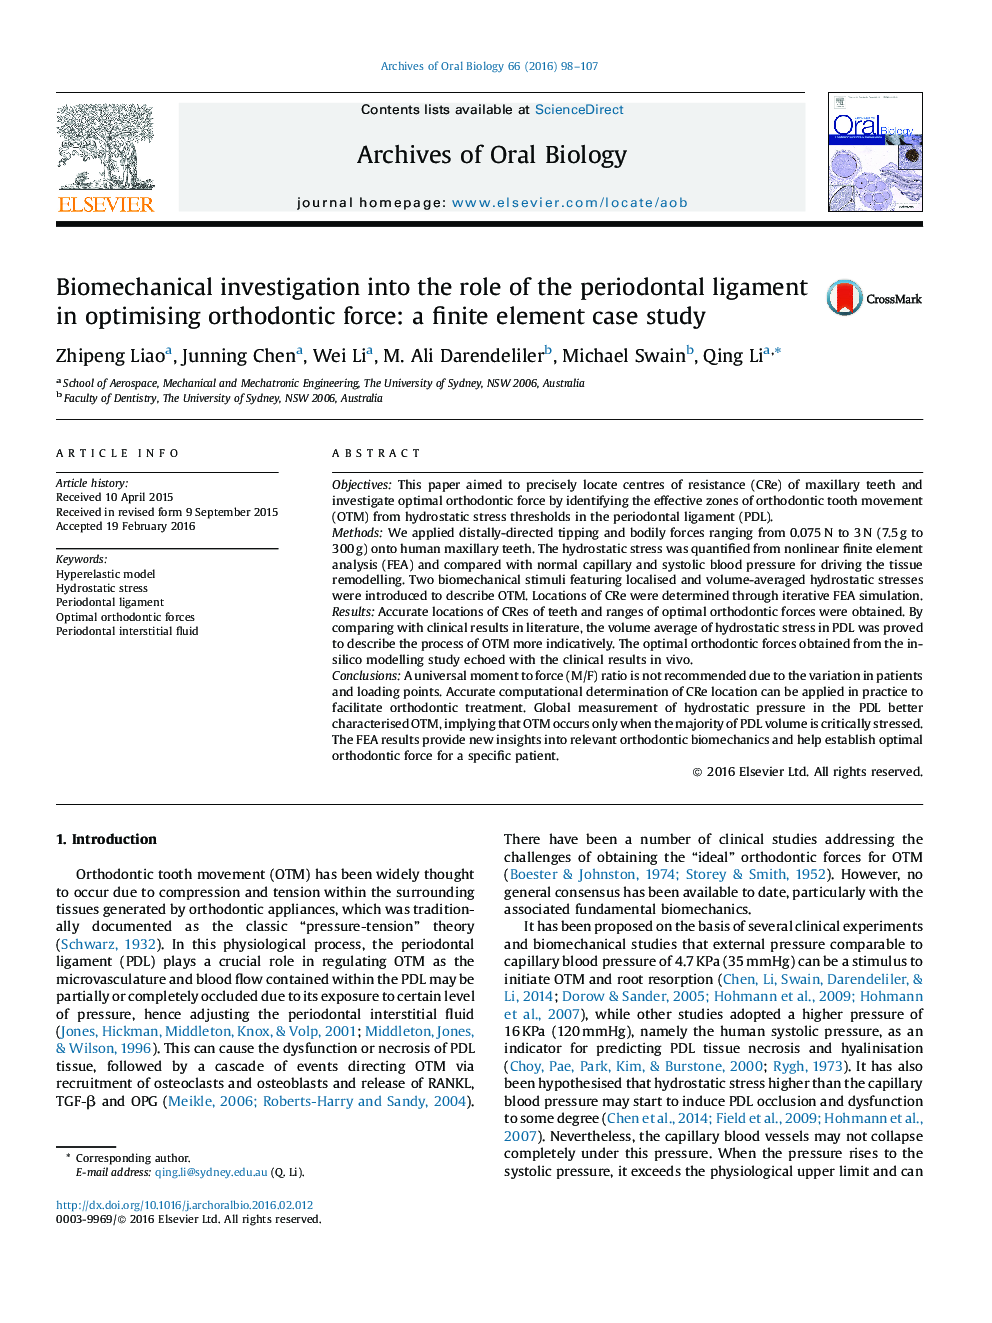 Biomechanical investigation into the role of the periodontal ligament in optimising orthodontic force: a finite element case study